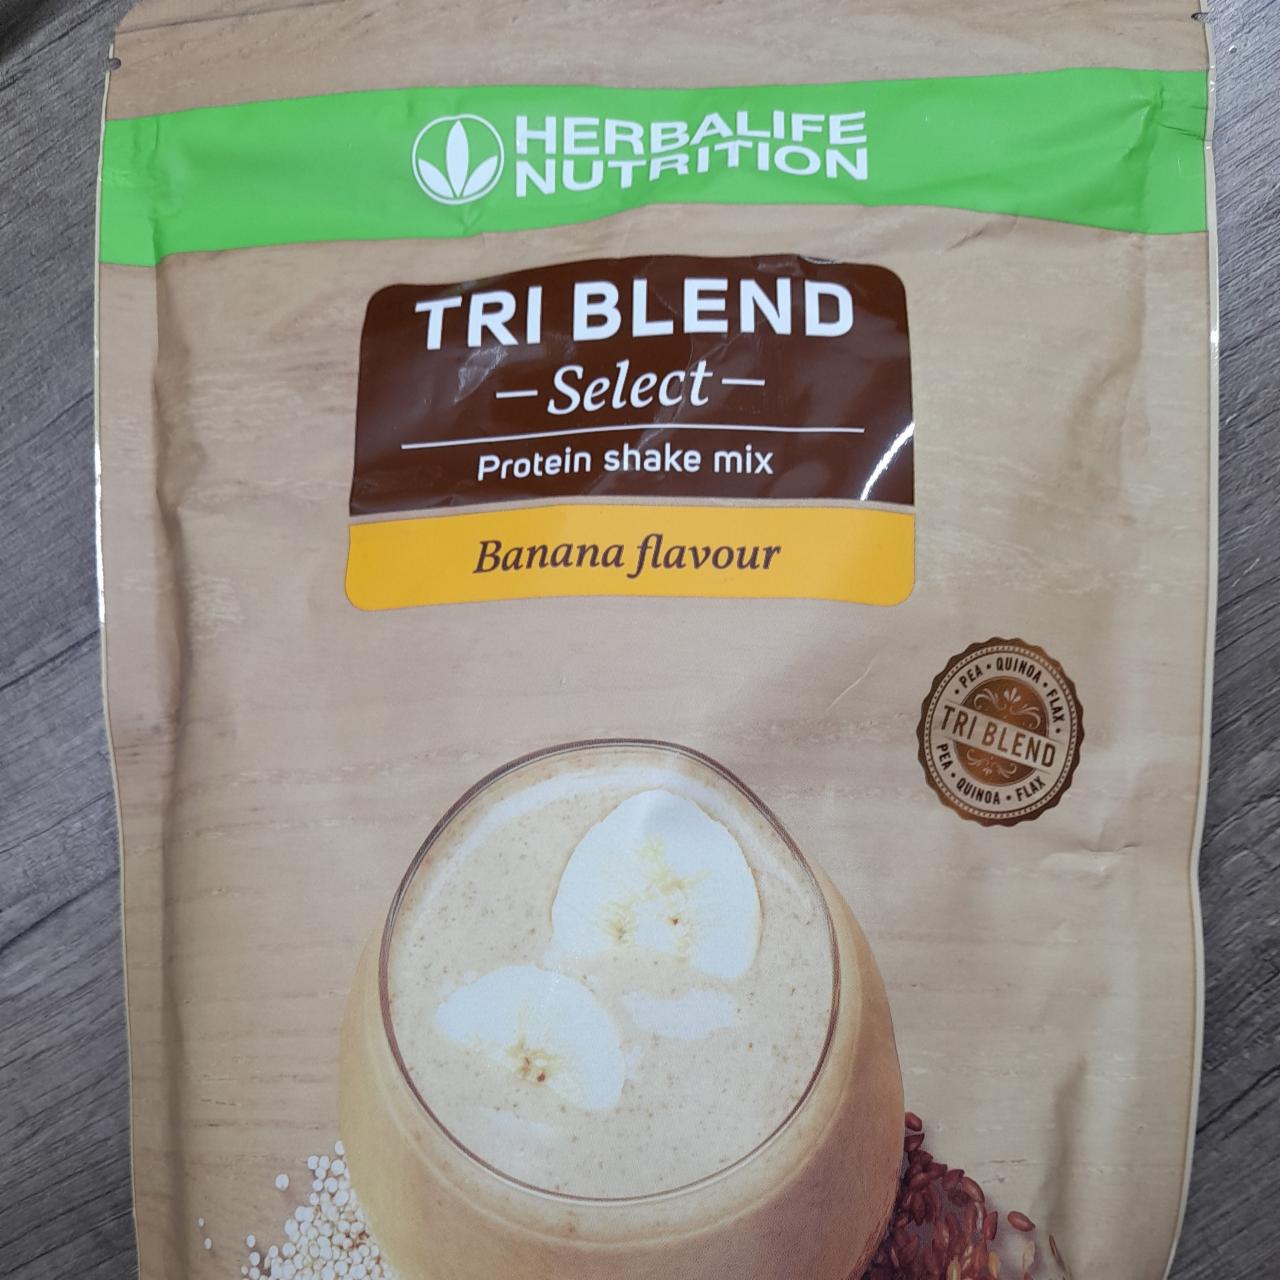 Fotografie - Tri Blend Select Protein shake mix Banana flavour Herbalife Nutrition